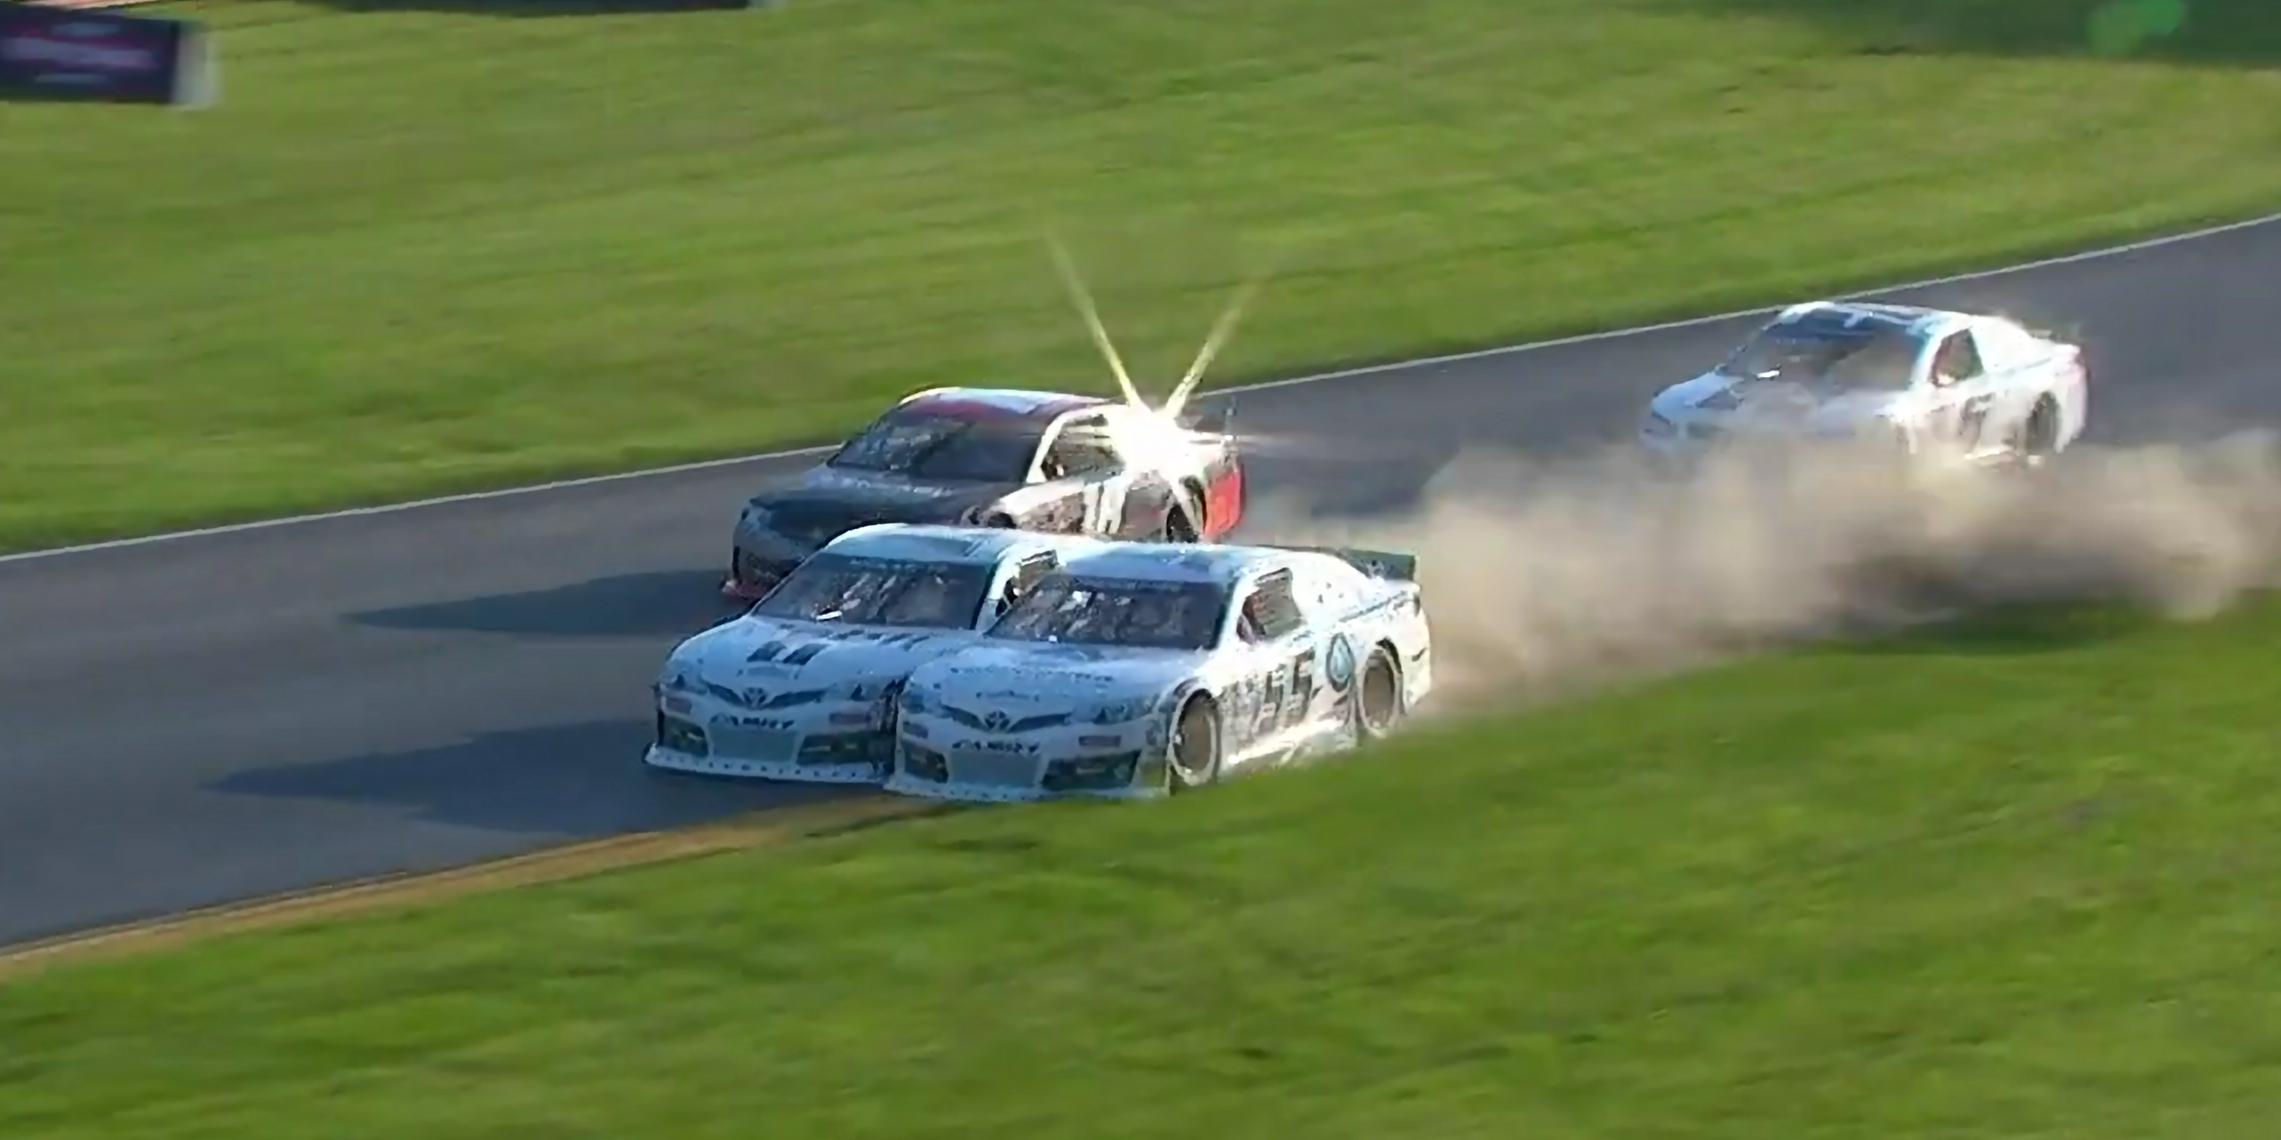 ARCA-Level NASCAR Driver Suspended for Wrecking Teammate